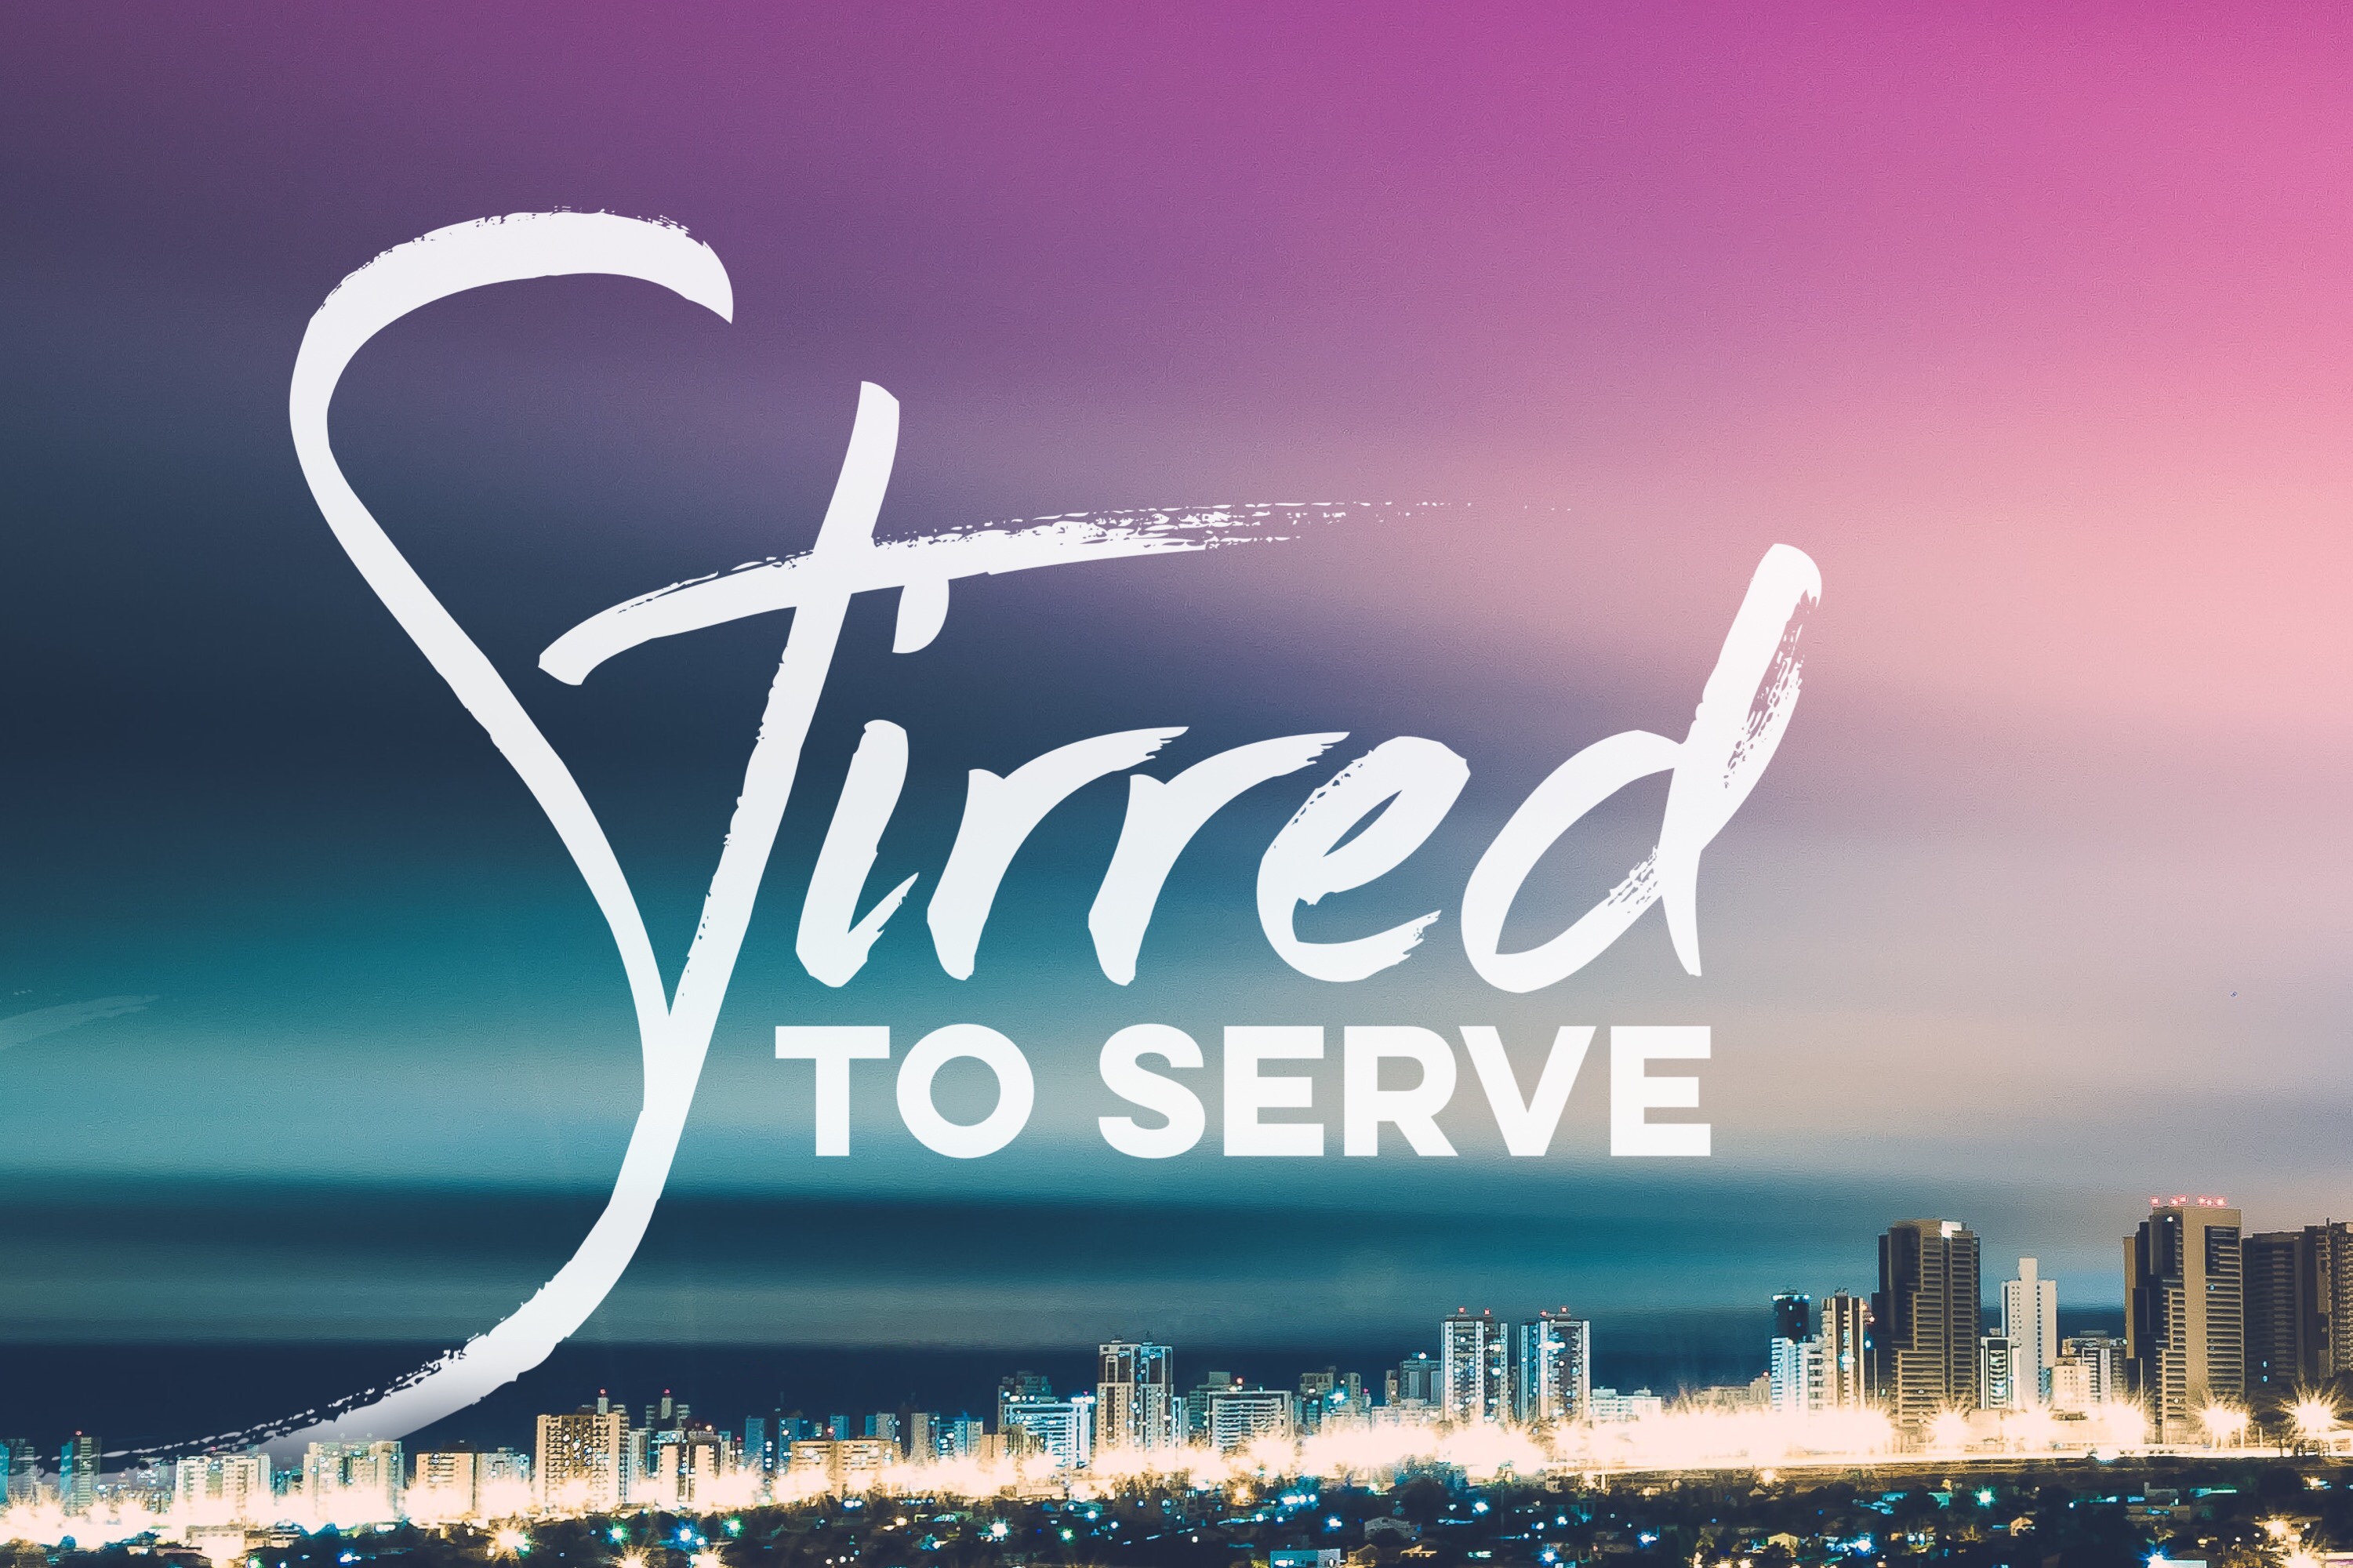 Stirred to Serve: Our Mission-Field